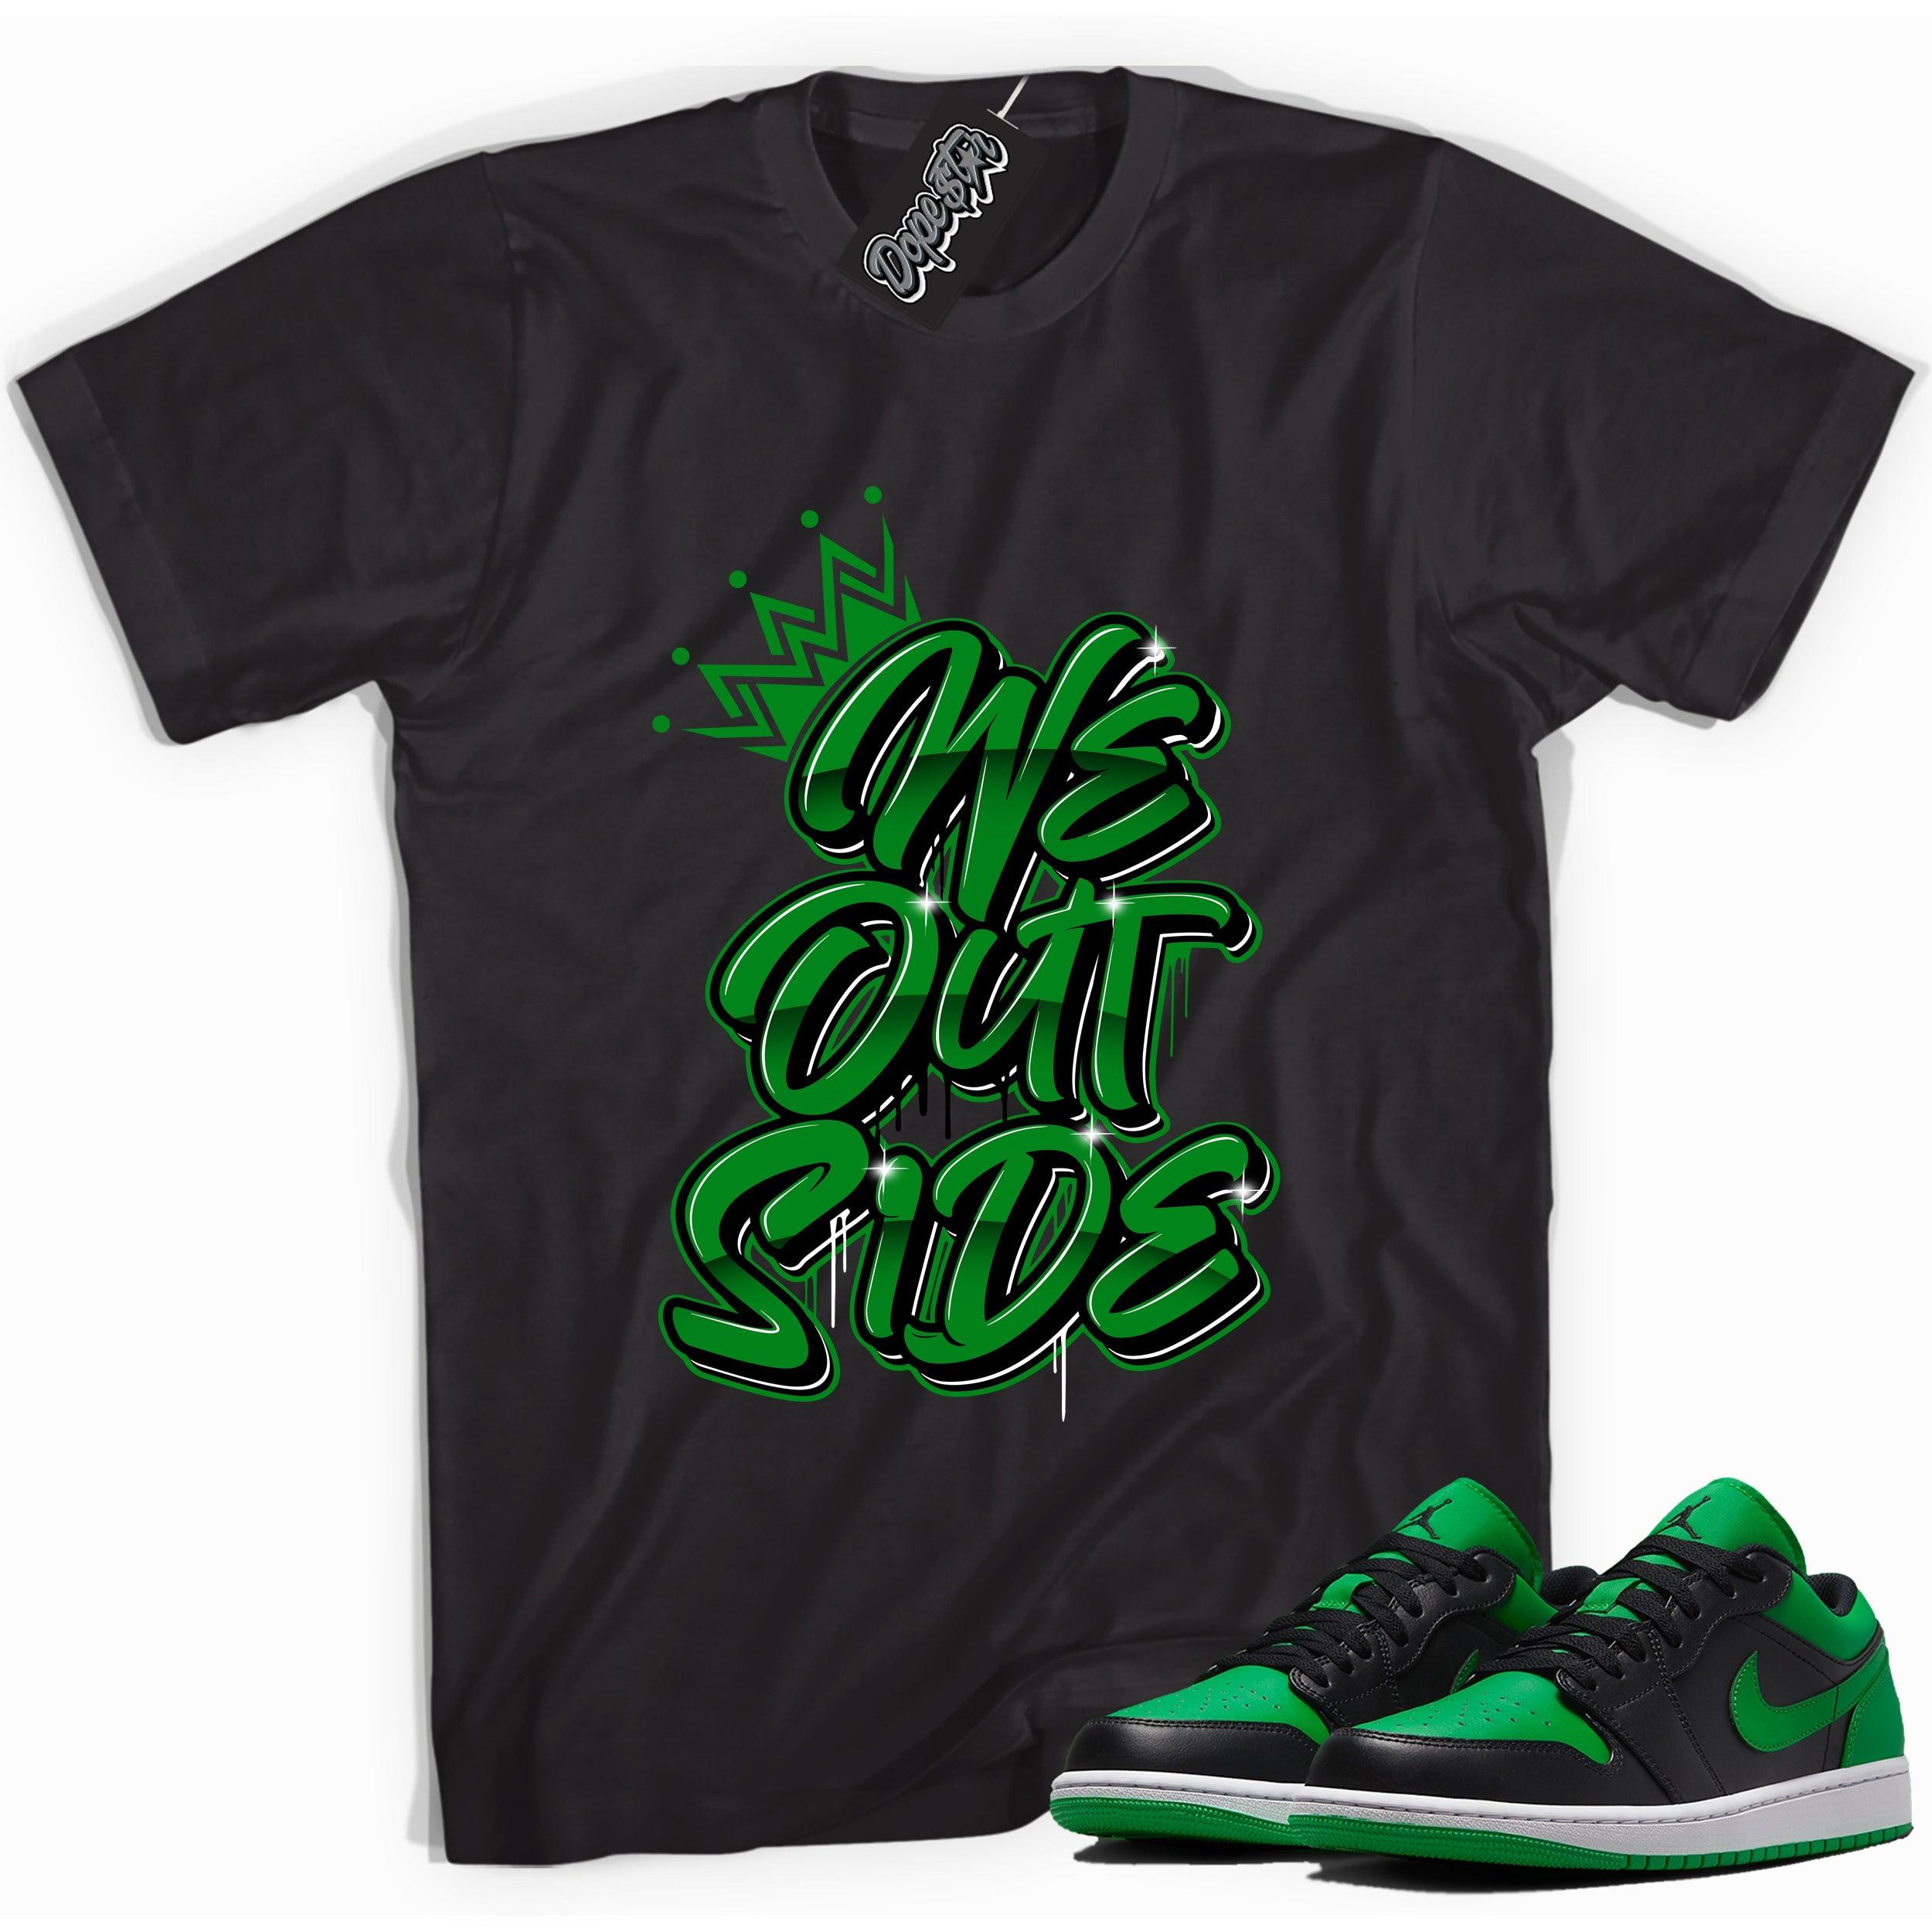 Cool black graphic tee with 'we outside' print, that perfectly matches Air Jordan 1 Low Lucky Green sneakers